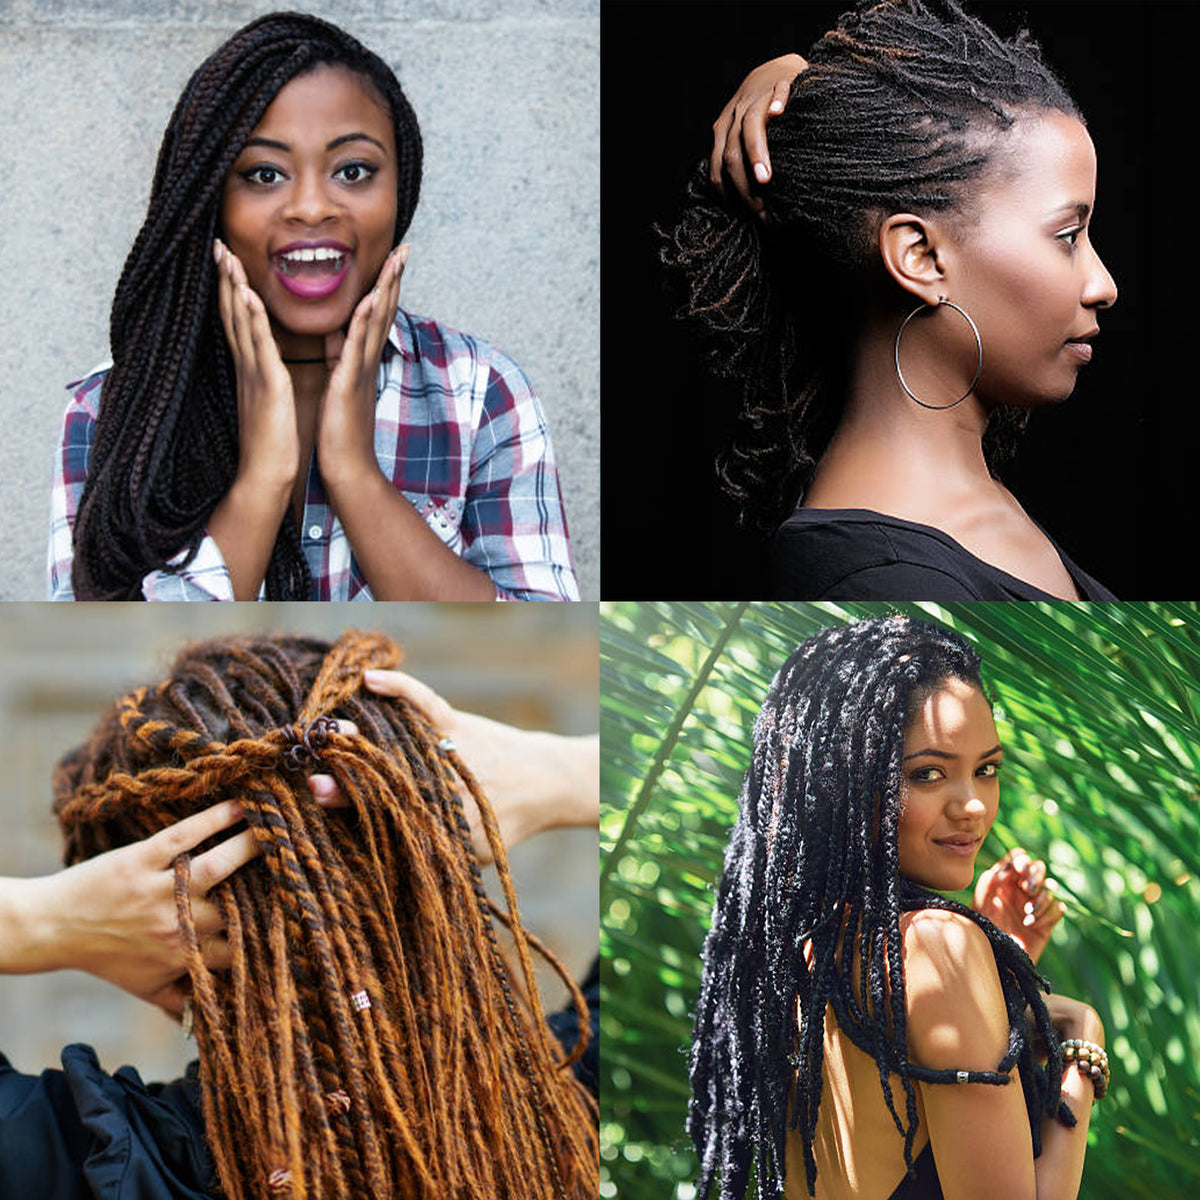 100% Human Hair Dreadlock Extensions 8Inch 10 Strands Handmade Natural Loc Extensions Human Hair Bundle Dreads Extensions For Woman & Men Can Be Dyed/Bleached (Natural Black 8 inch length 0.2cm Width